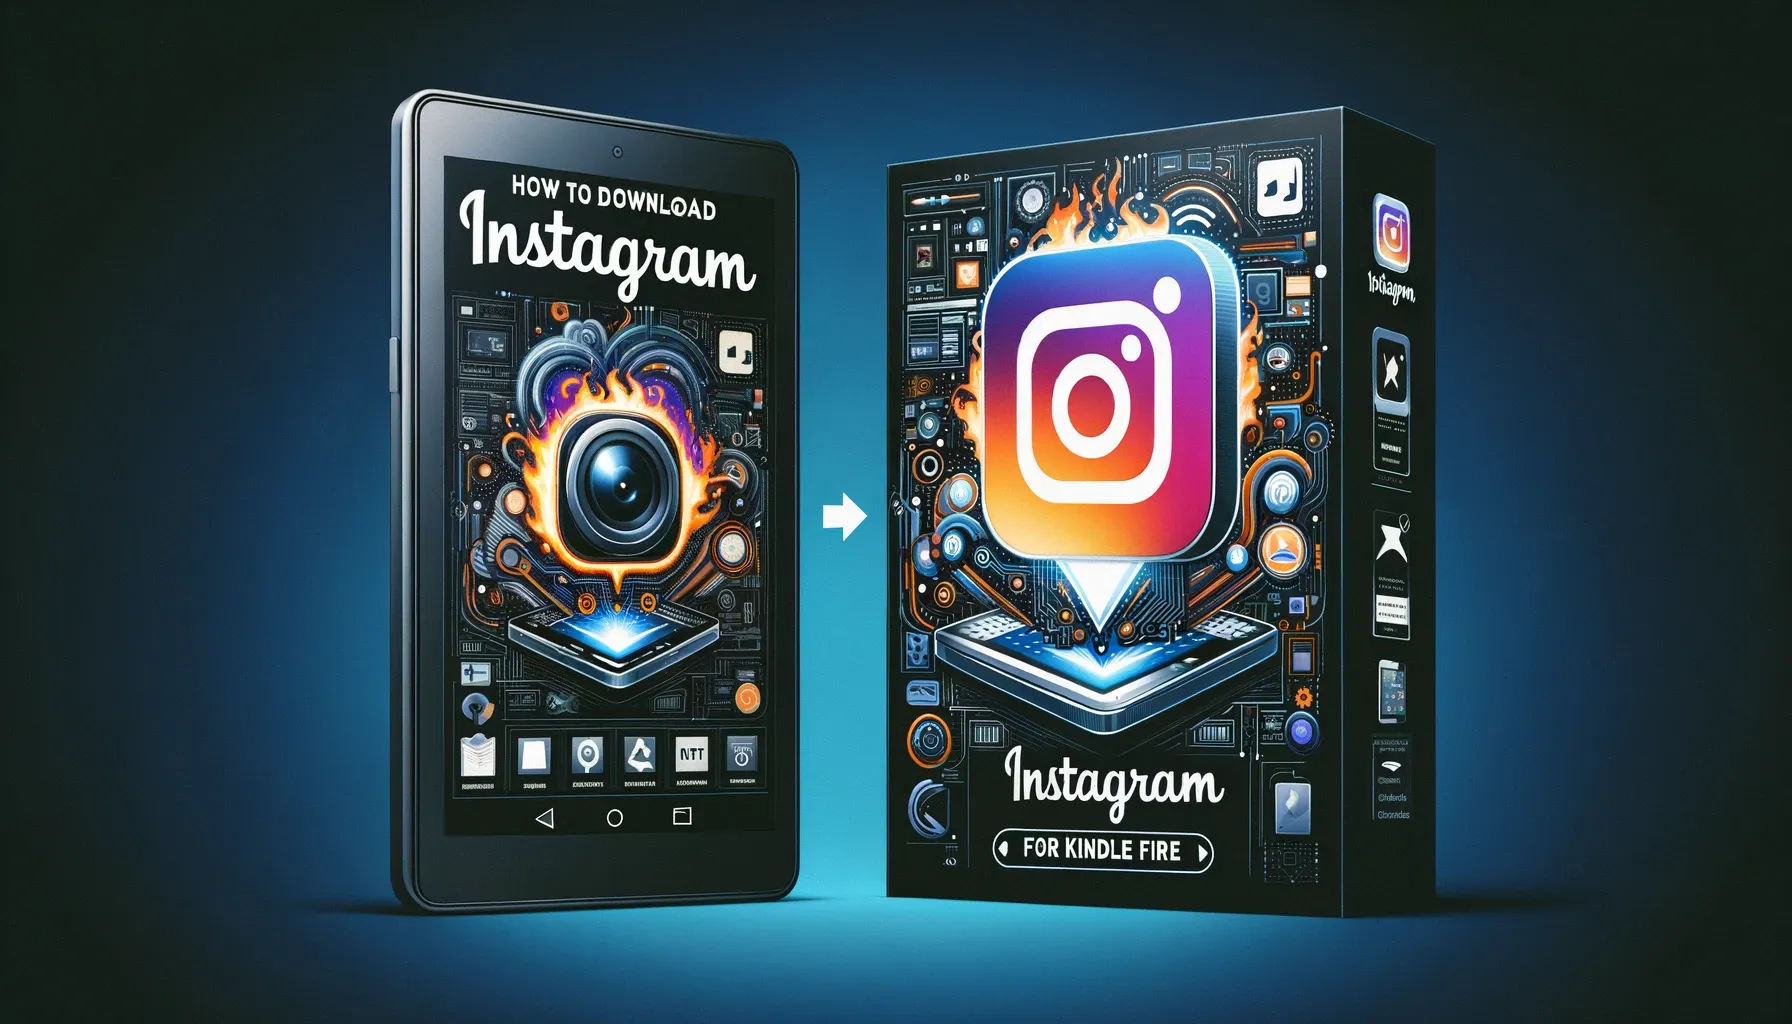 How to download Instagram for Kindle Fire?